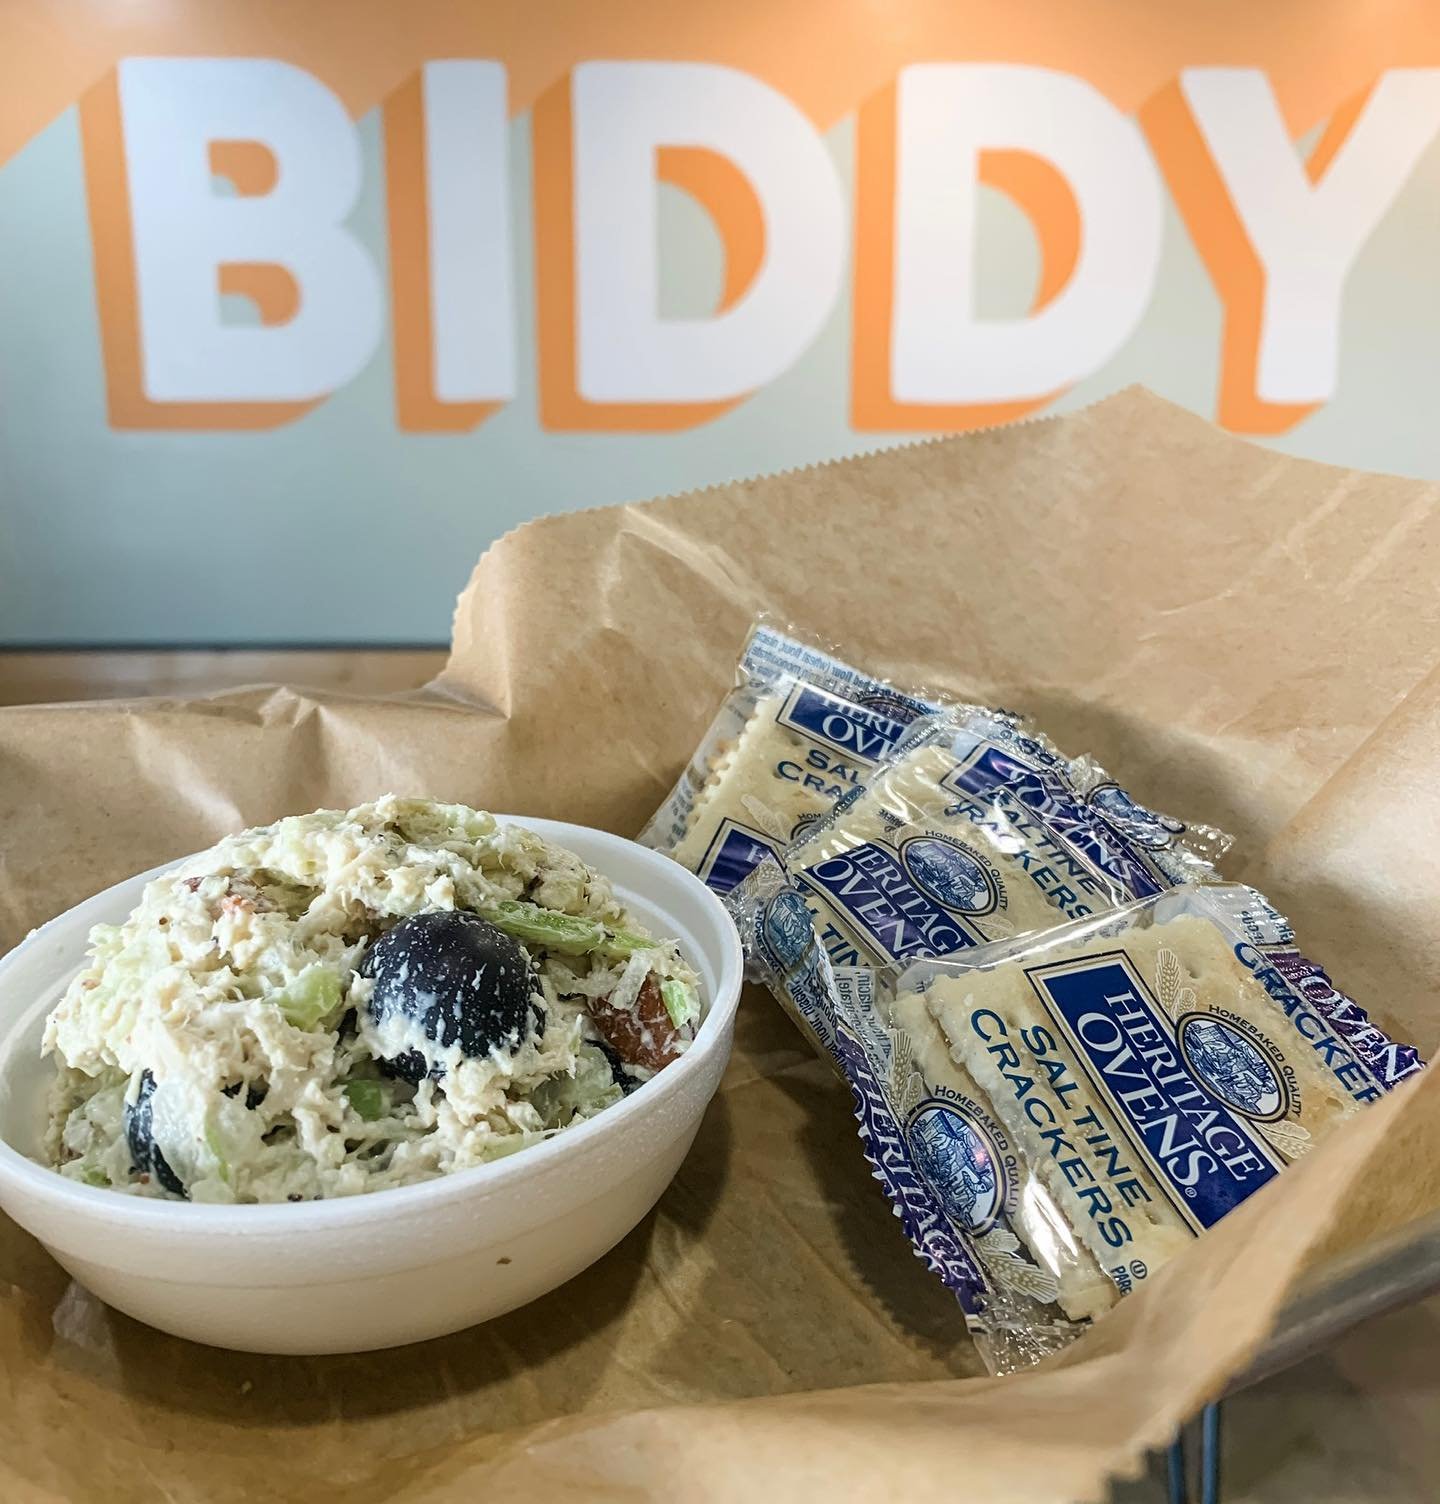 Keepin&rsquo; things light and refreshing with our signature chicken salad. Made in-house with fresh ingredients, try it with crackers or on a sandwich/wrap!l today! #biddyschicken #chickensalad #yummy #goodfoodgoodmood #happinessbythescoop #maconga 